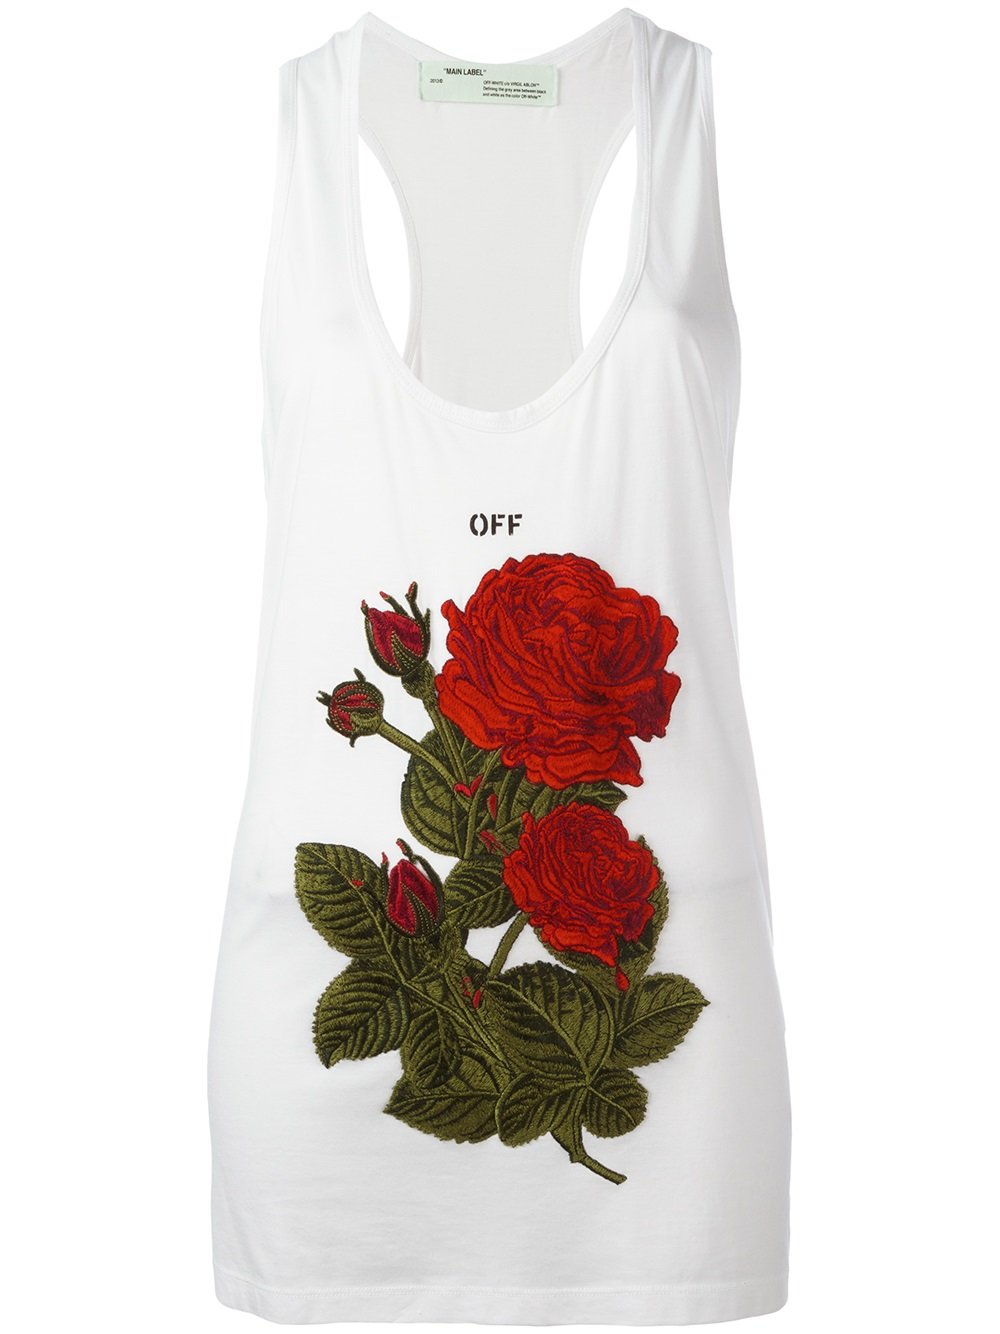 Off-White rose embroidery tank latest fashion-trends 0188 WHITE Women Clothing Vests & Tops